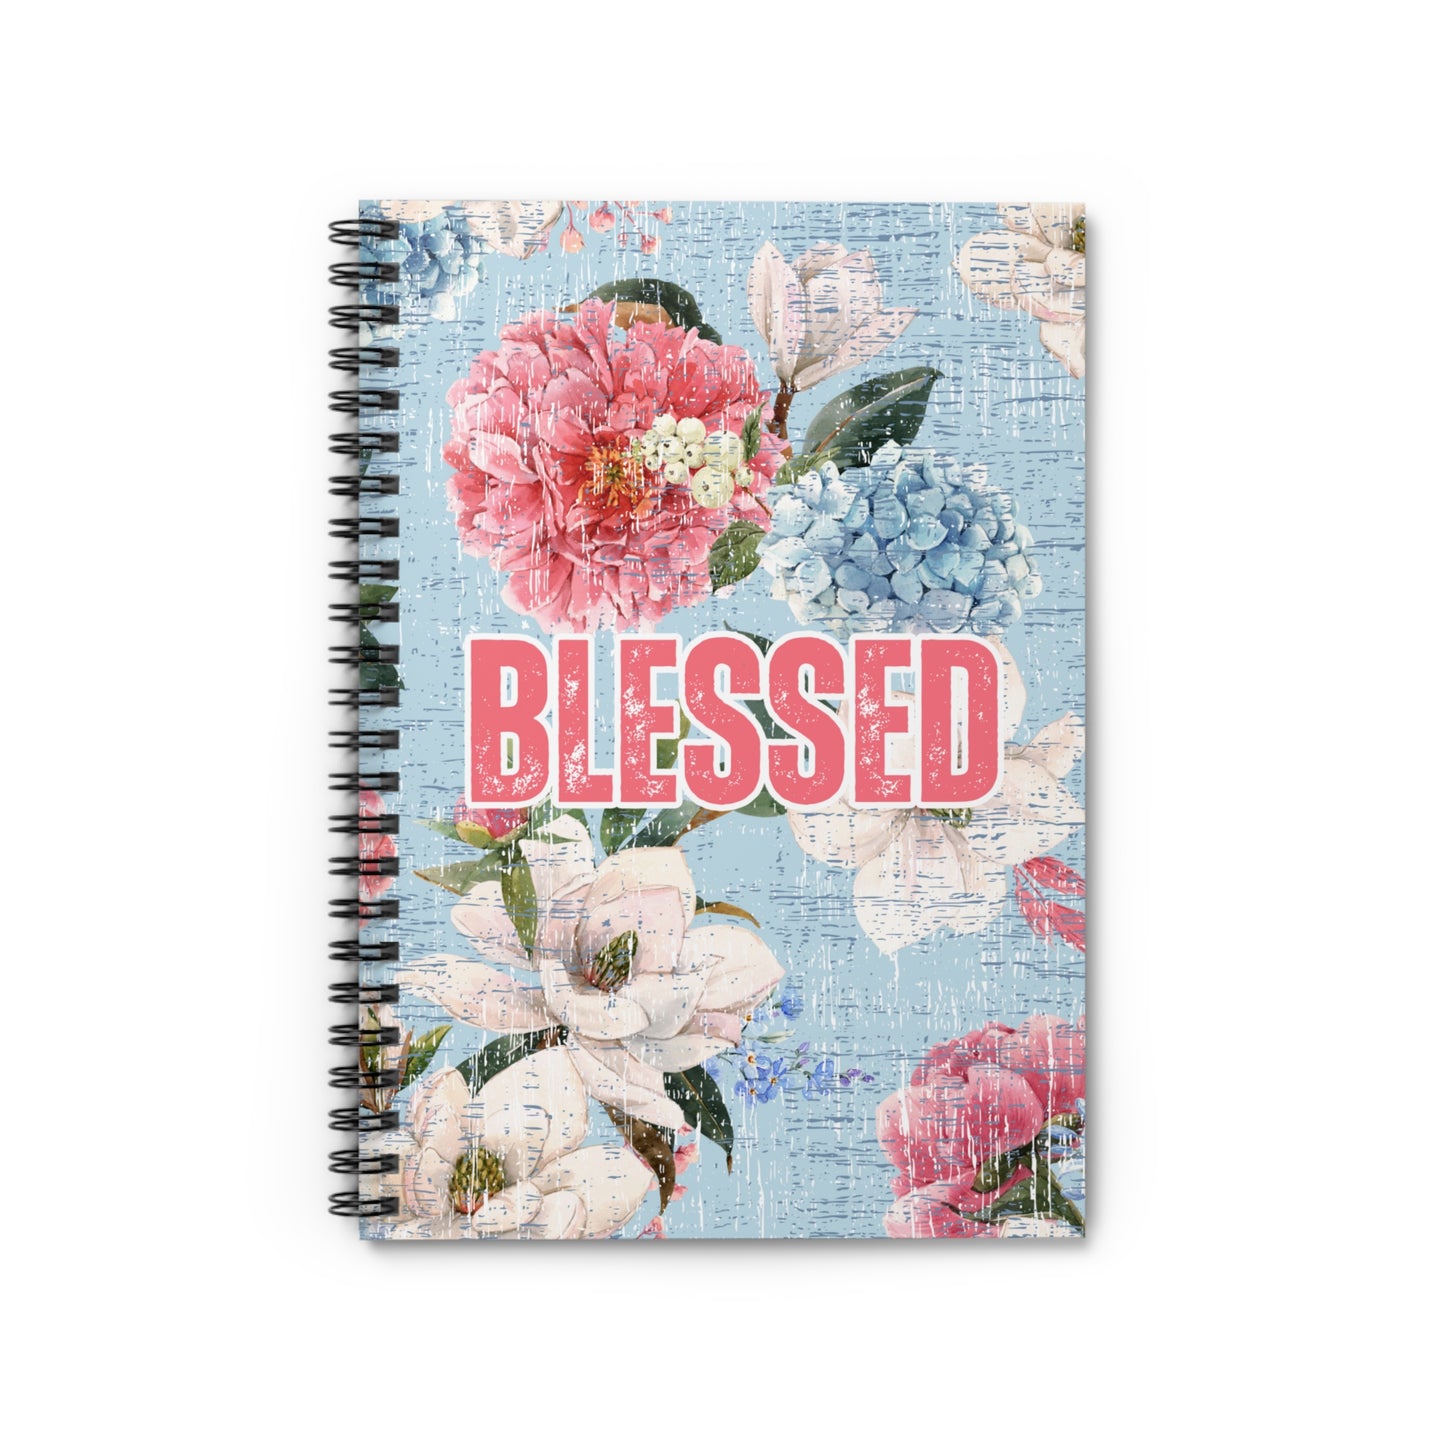 Blessed Blooms: Ruled Spiral Notebook with Inspiring Floral Background - Eddy and Rita